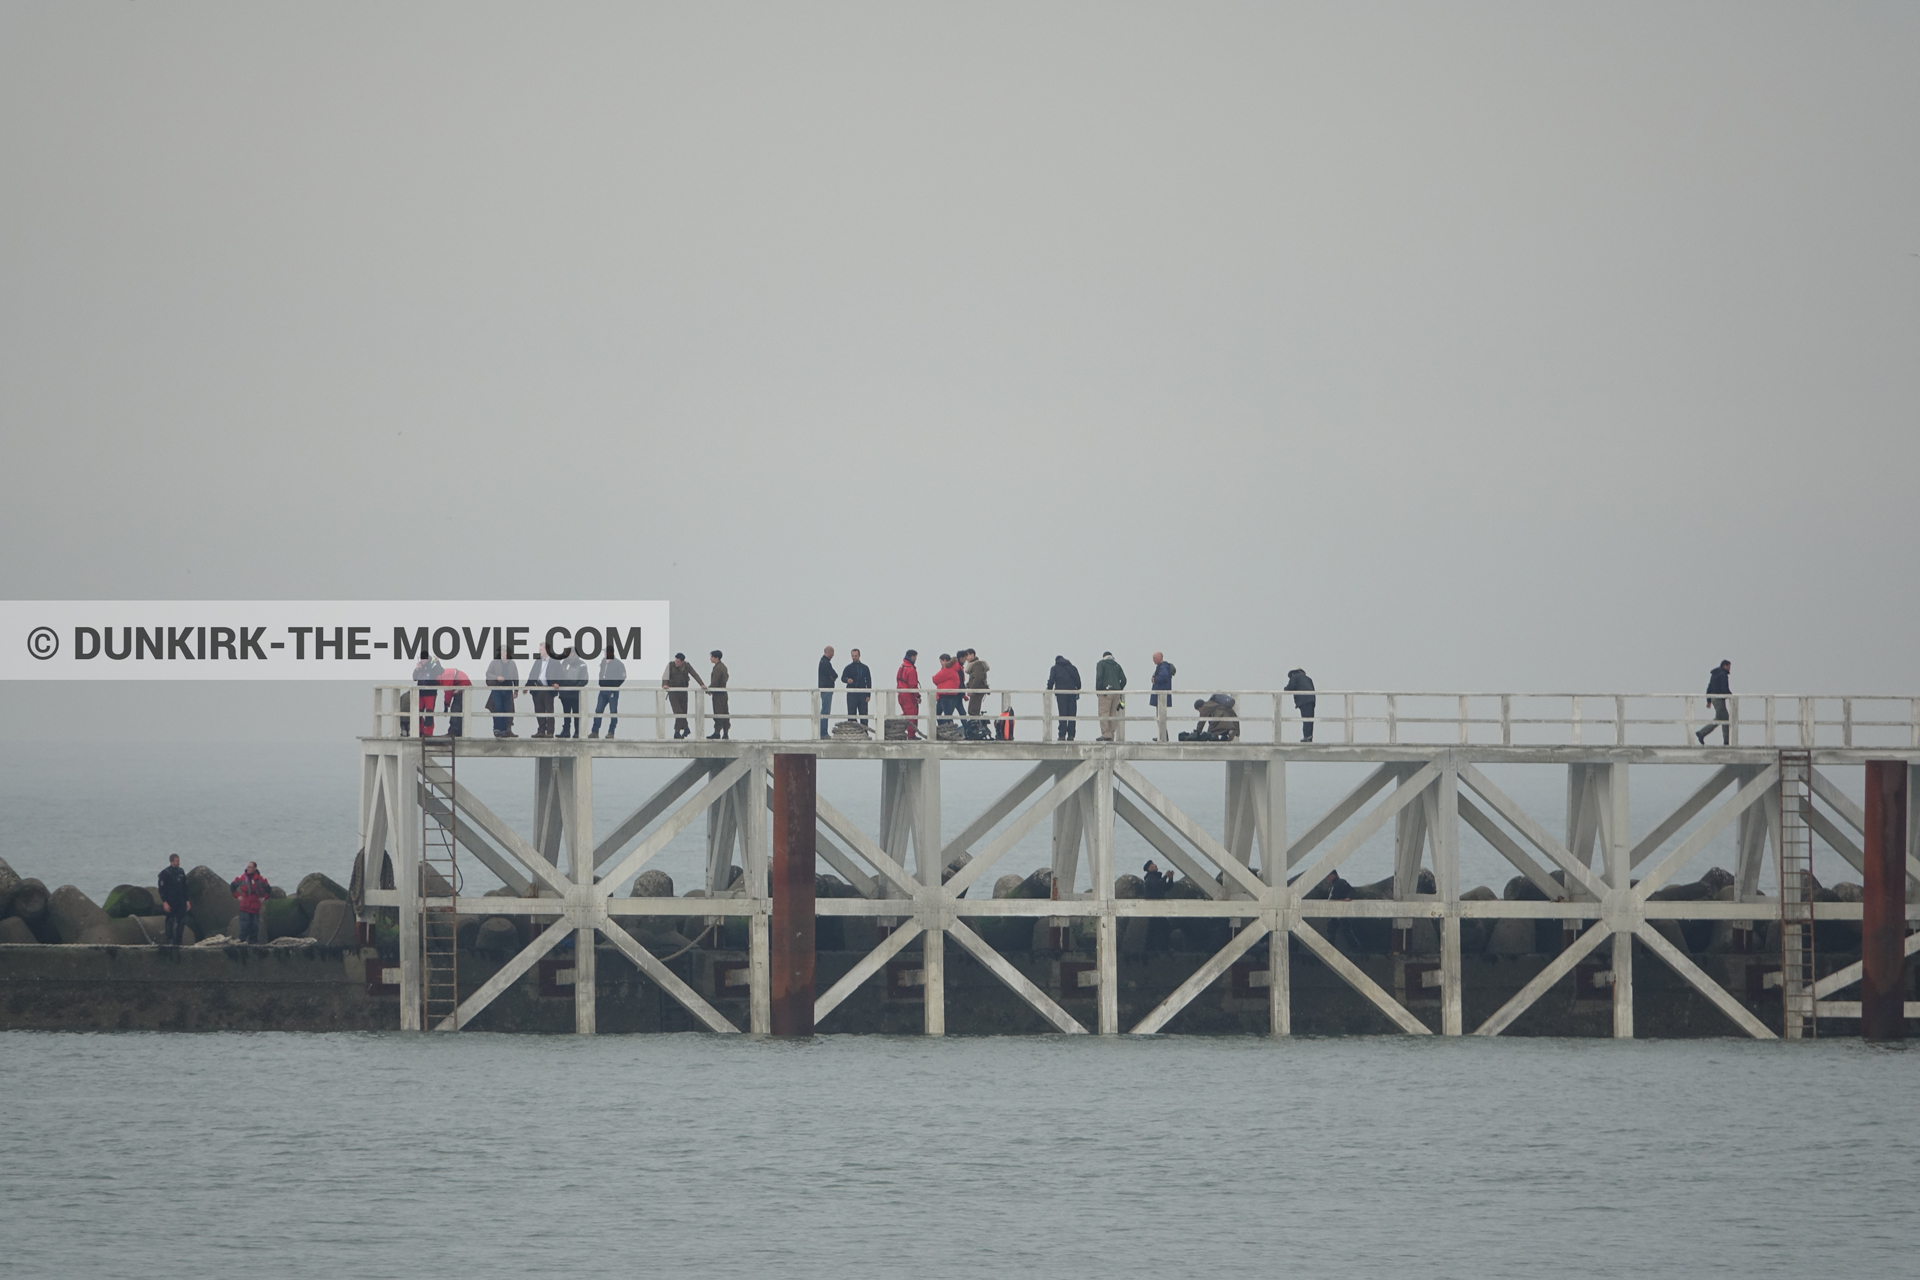 Picture with actor, grey sky, Hoyte van Hoytema, EST pier, calm sea,  from behind the scene of the Dunkirk movie by Nolan